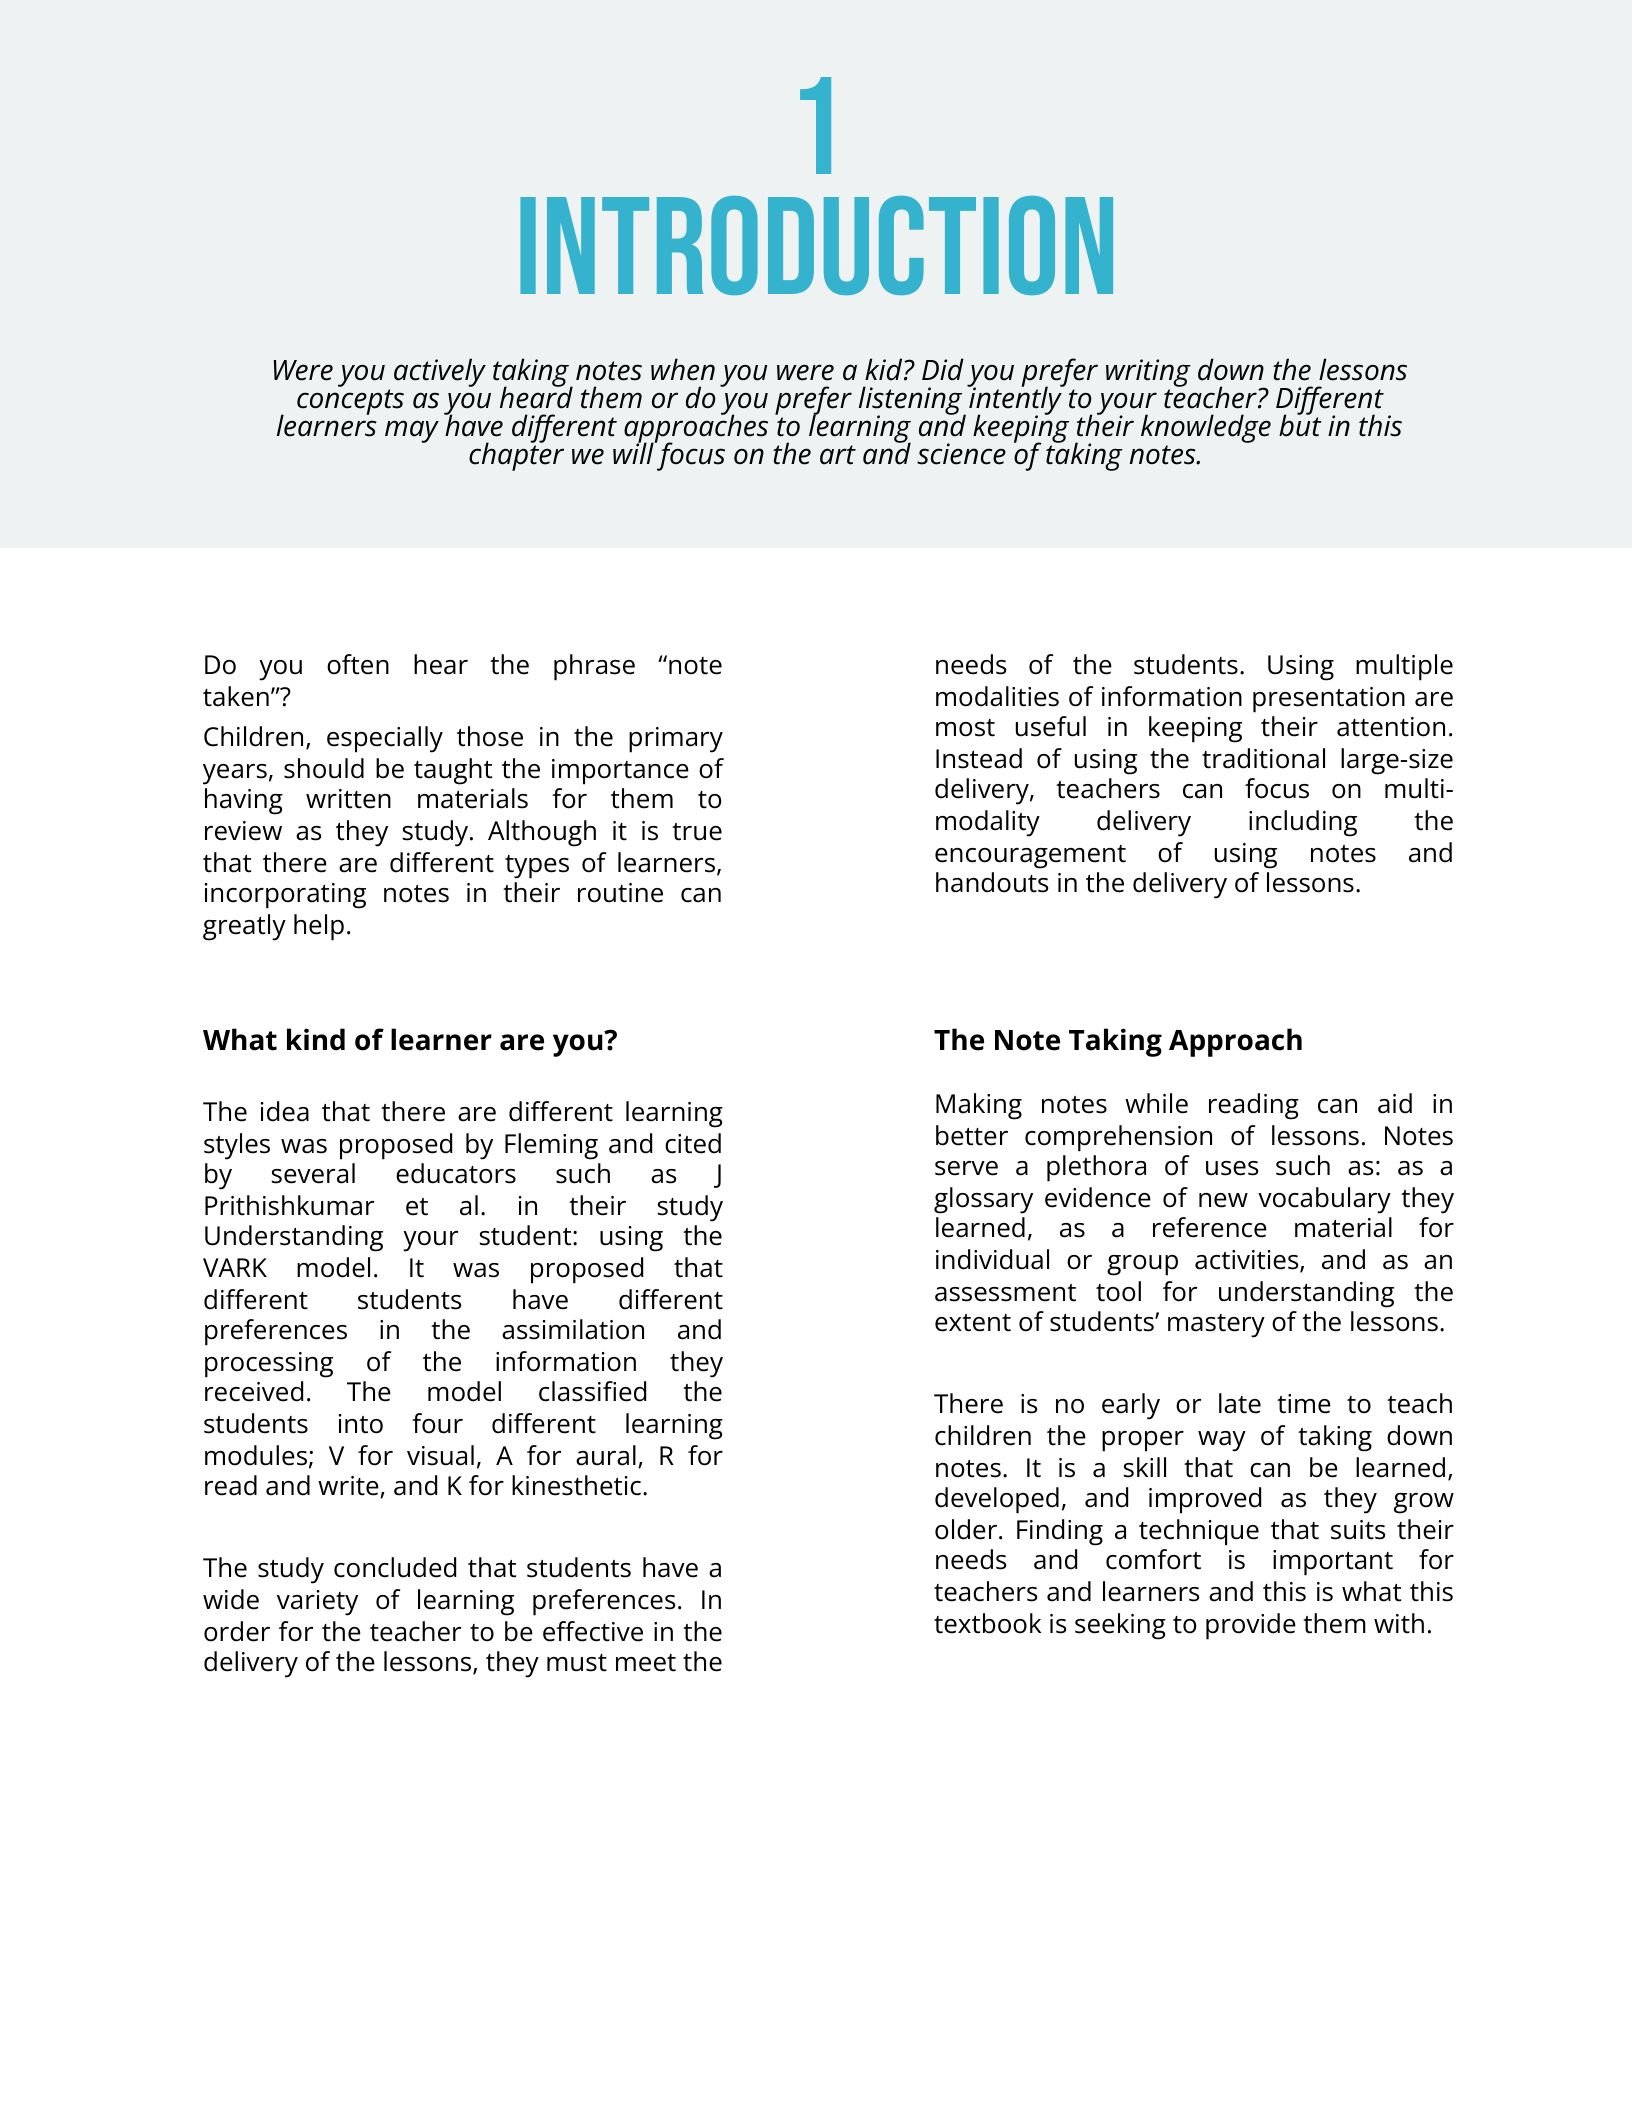 Textbook Note Taking Template Download in Word, Illustrator, PSD